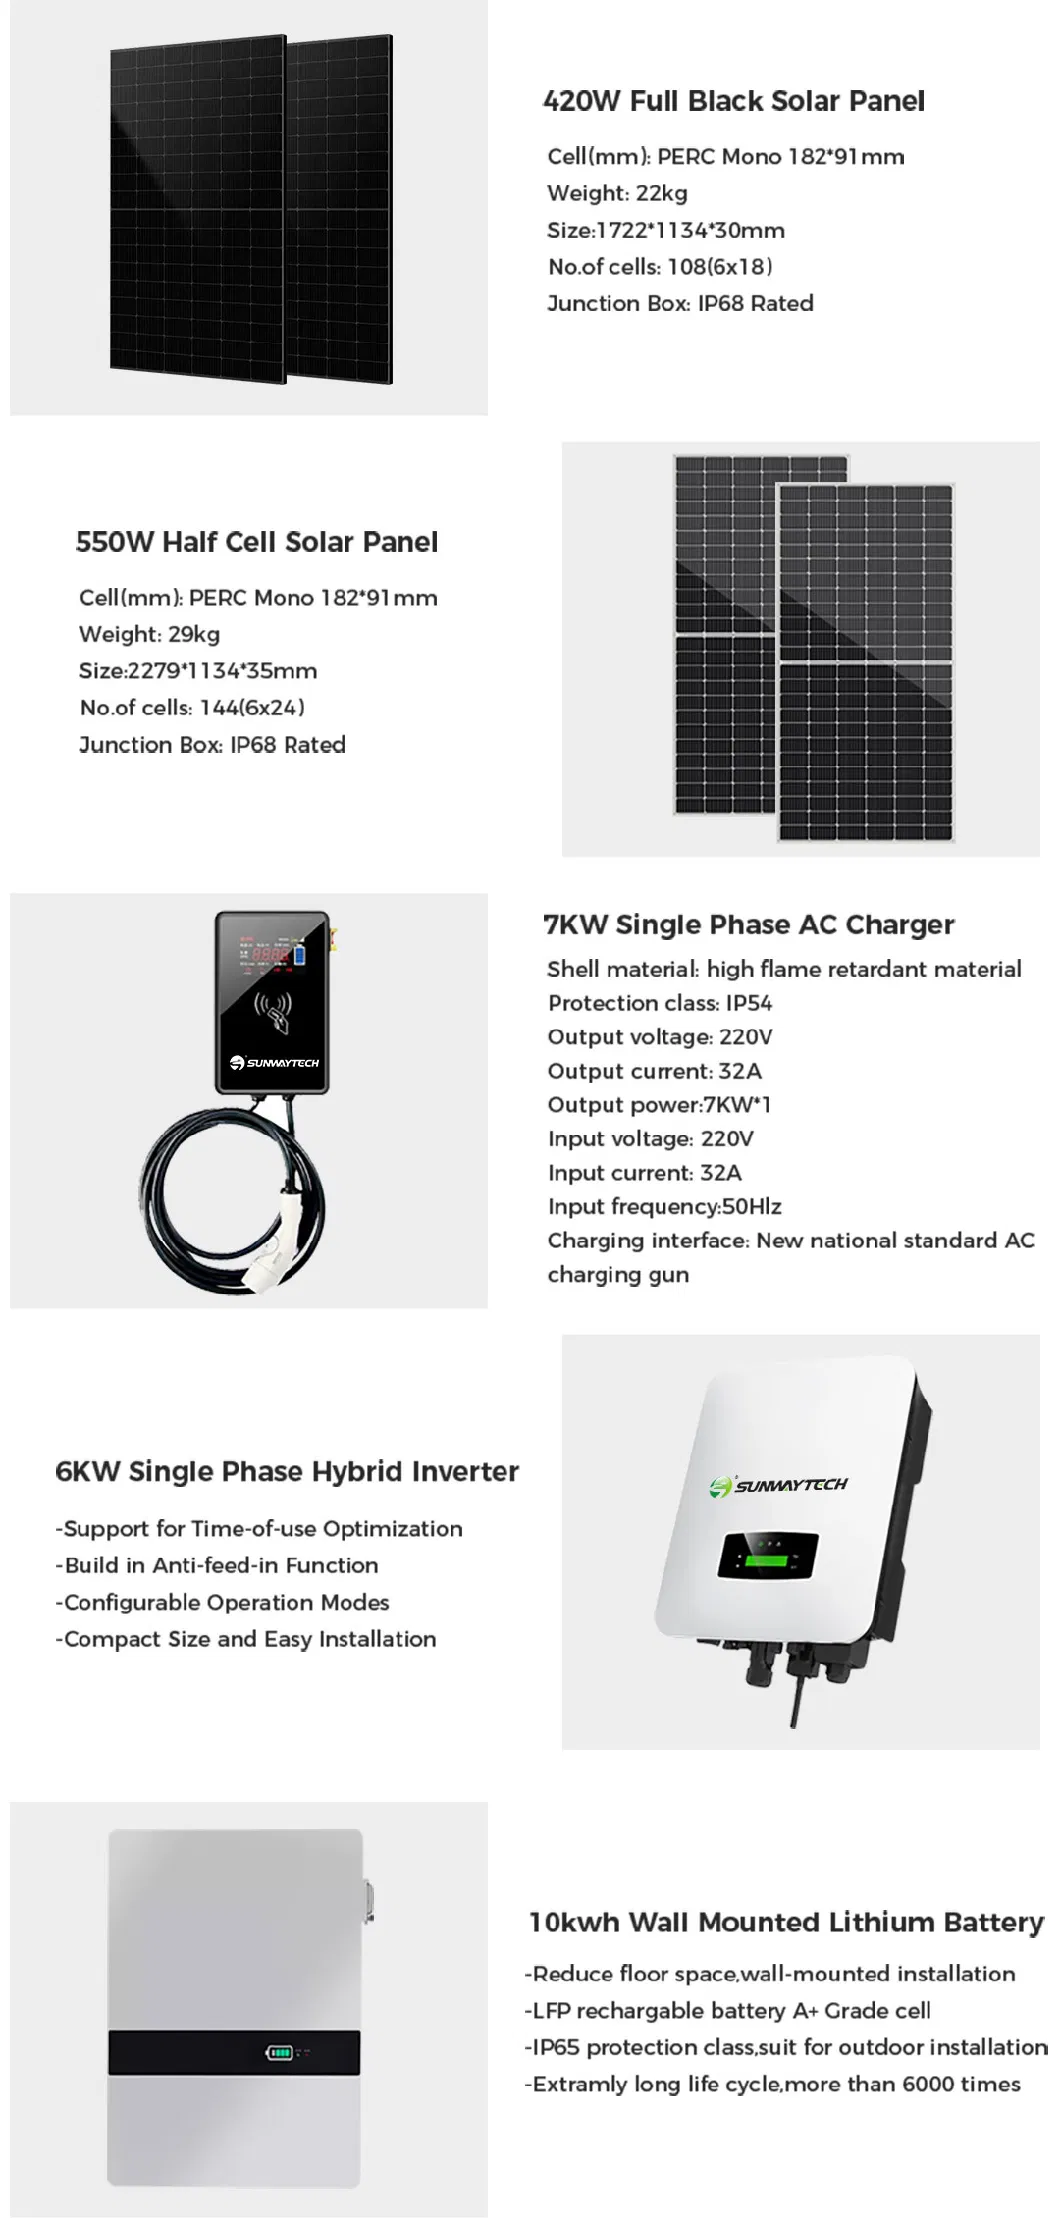 Sunway OEM Electric Car EV Charger Type 2 AC Wall Box Home EV Charging Station with 4.3 Inch LCD Display